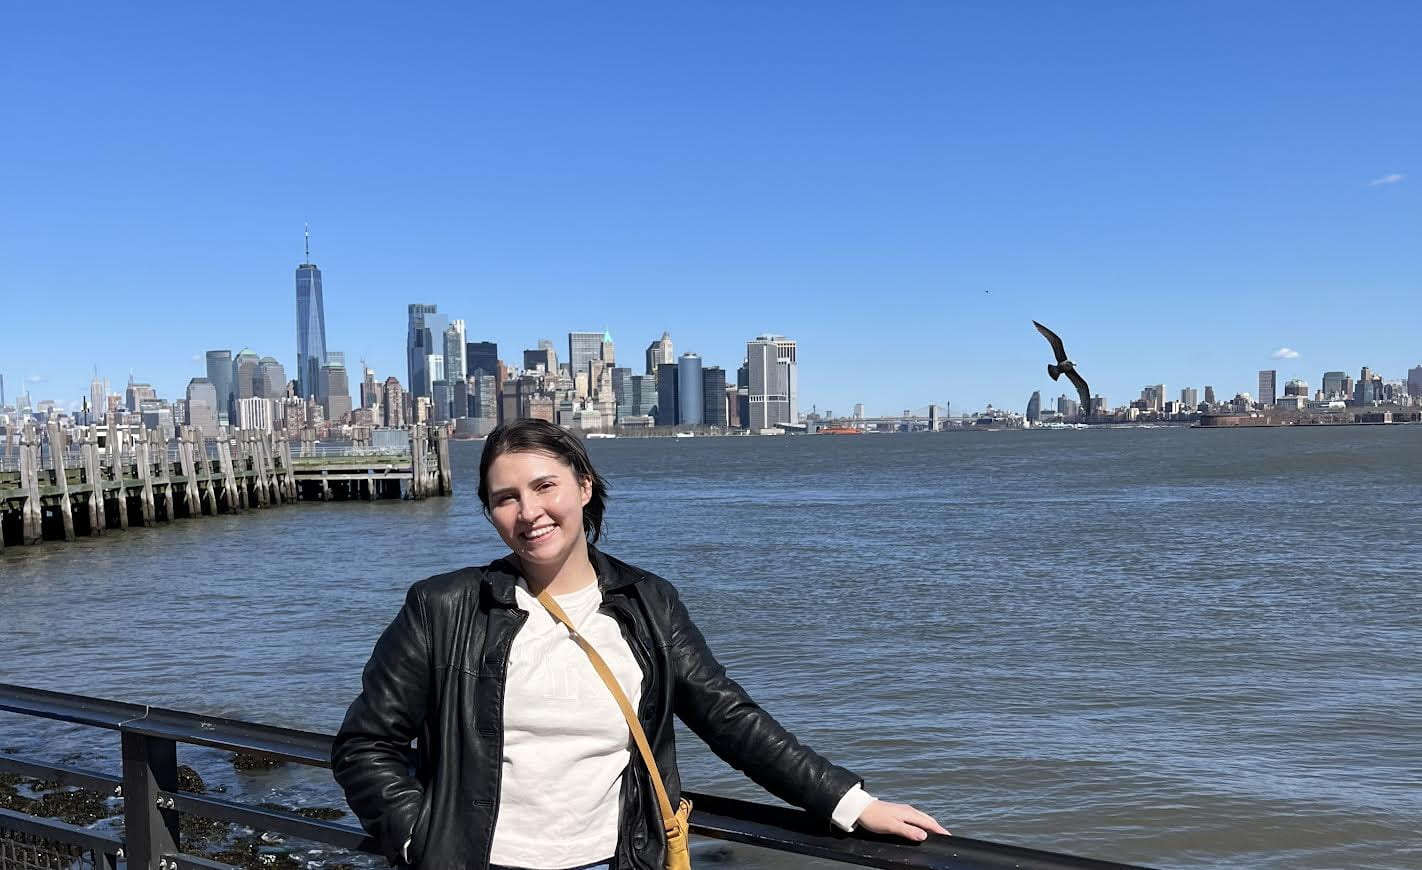 <img src="Devina.jpg" alt="Picture of staff member Devina with the NY skyline in the background">